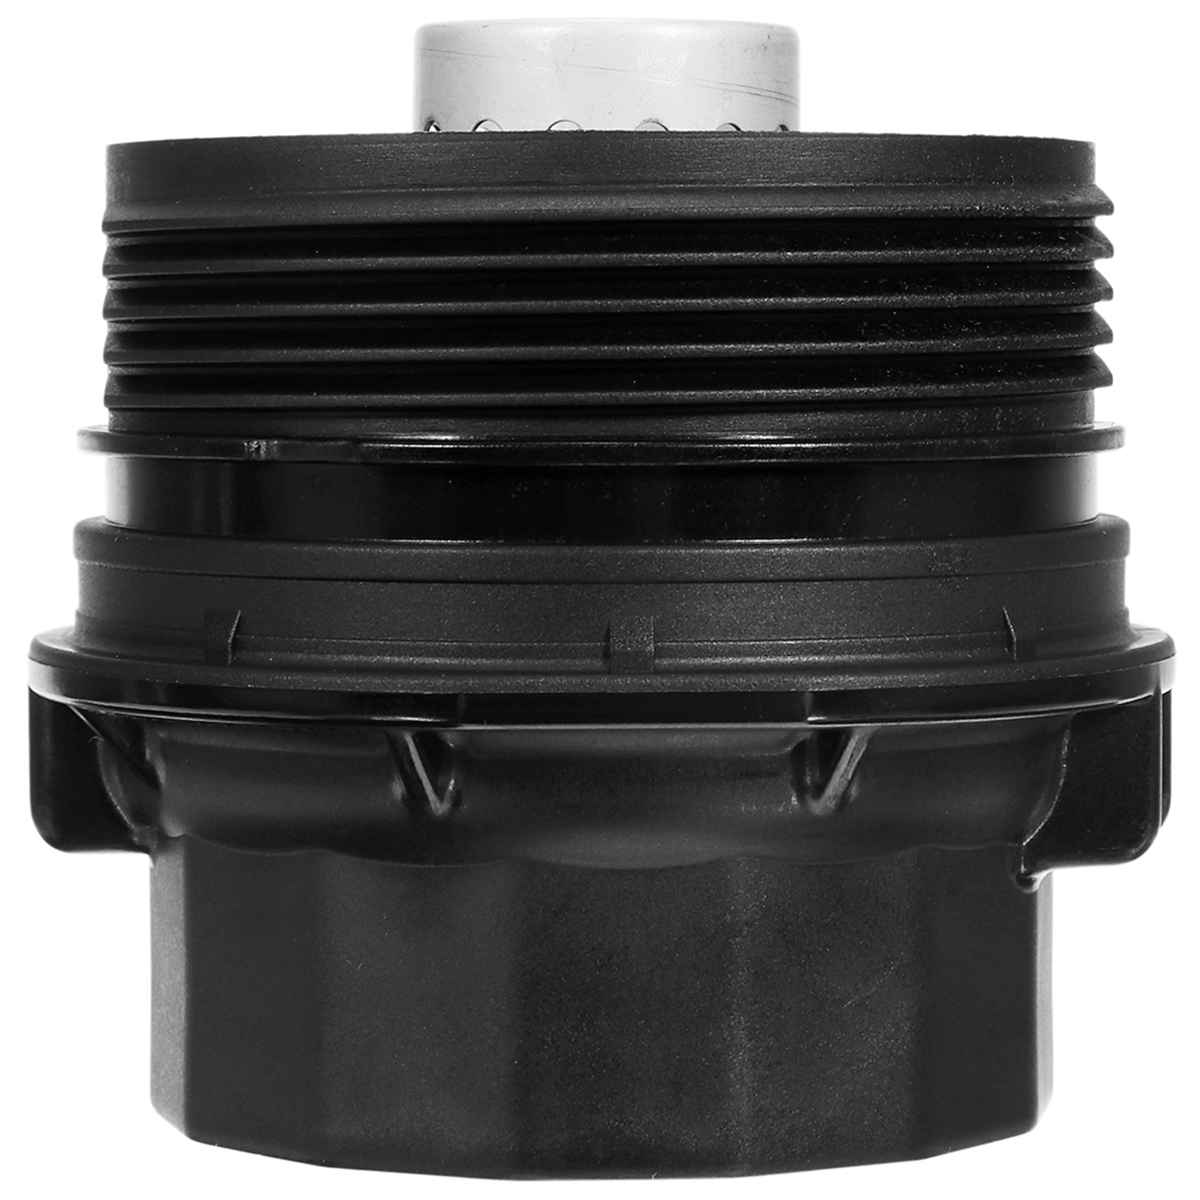 Car Oil Filter Cap Housing Cap New Universal For Toyota For Lexus Black Scion Assembly Oil Filter In Car Tank Cover 15620-3701